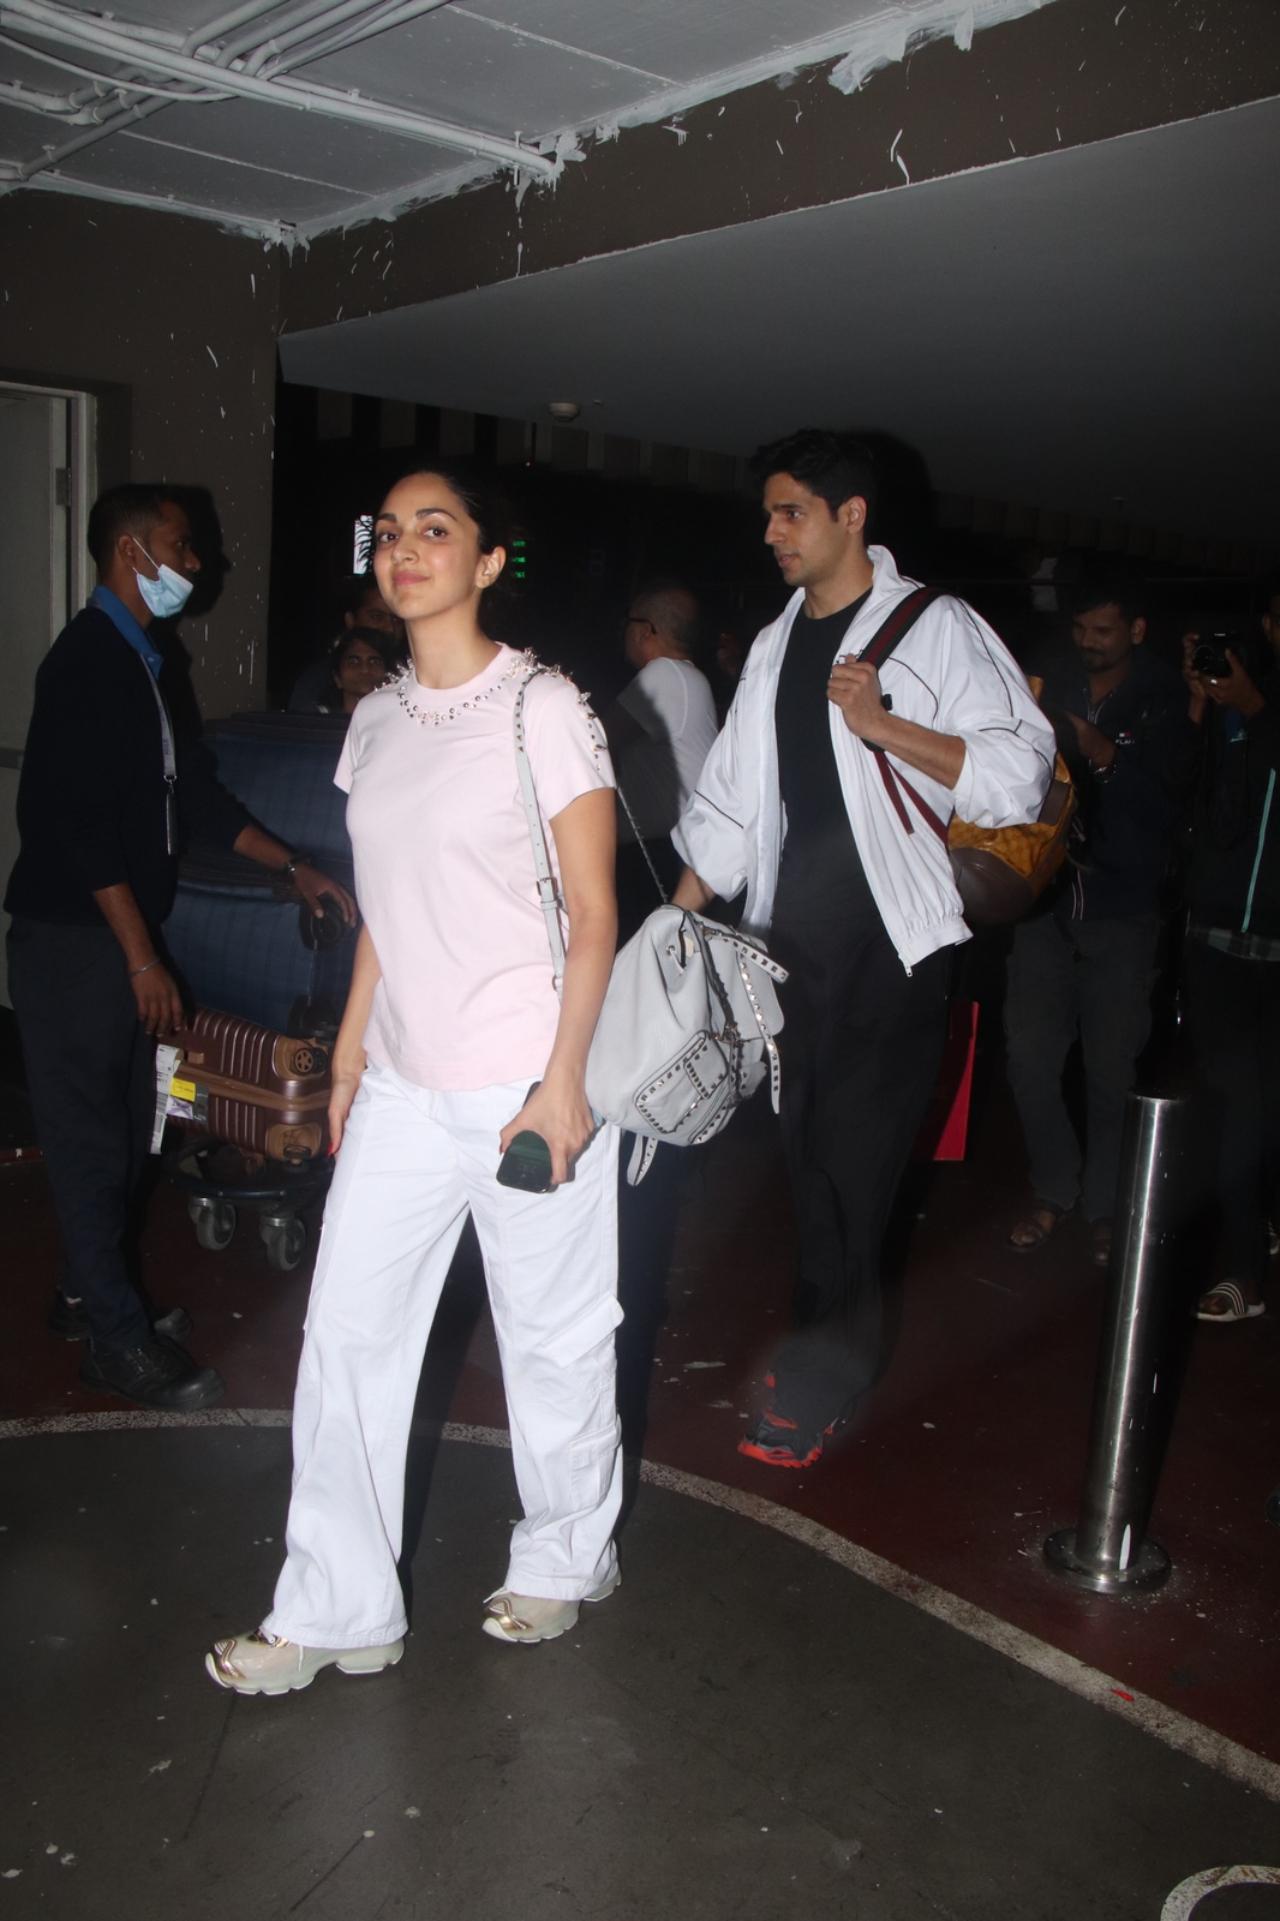 Both were dressed in casuals for their flight back home. While Kiara Advani was seen wearing a pastel pink tee with white pants, Sidharth sported an overall black outfit with a white tee